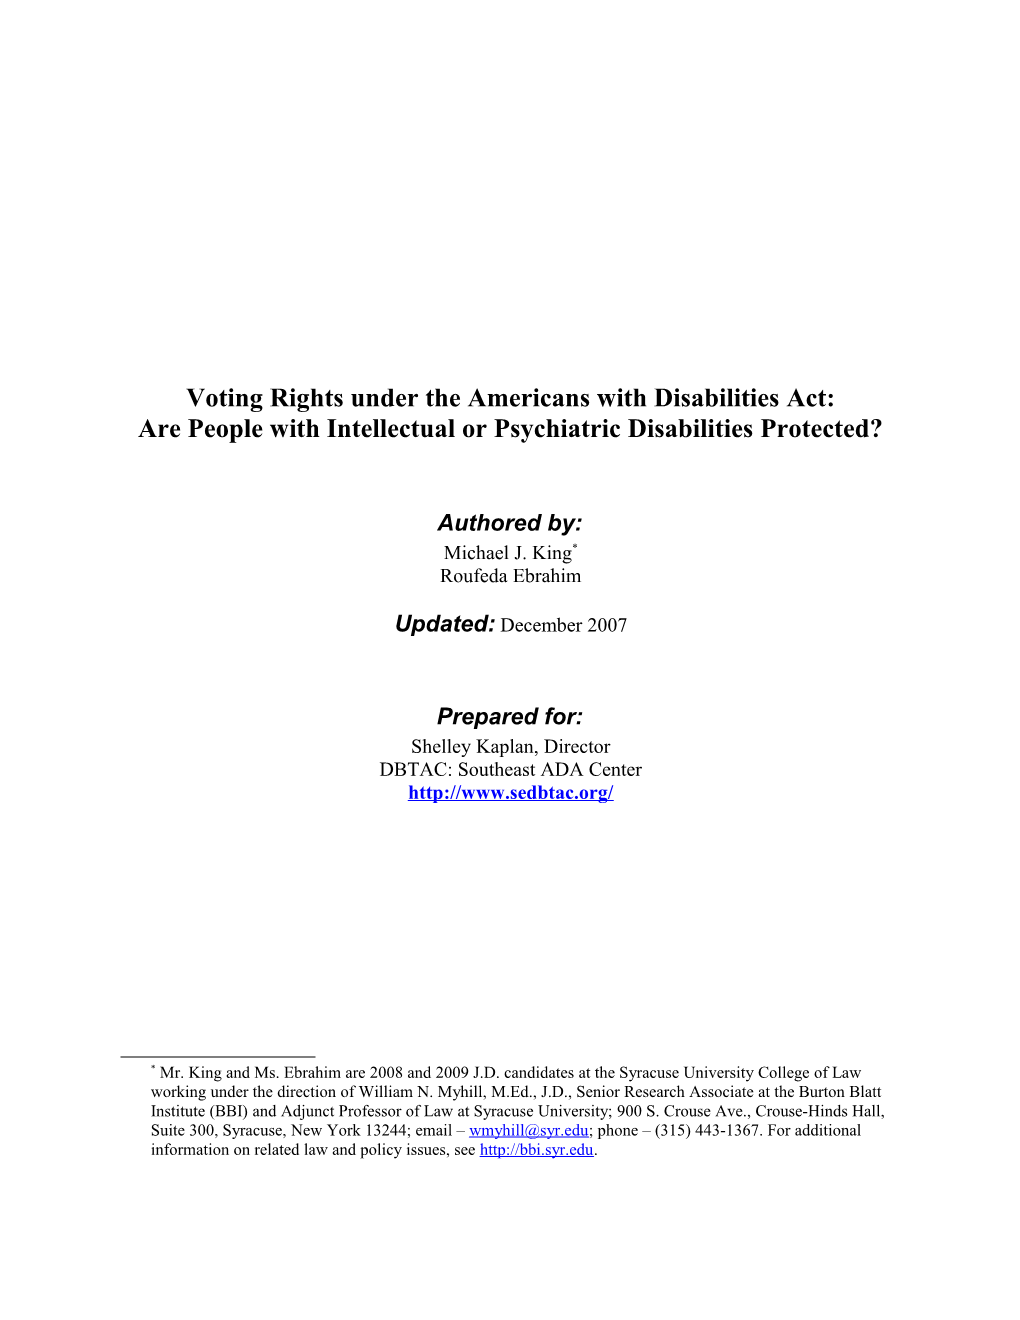 Voting Rights Under the Americans with Disabilities Act